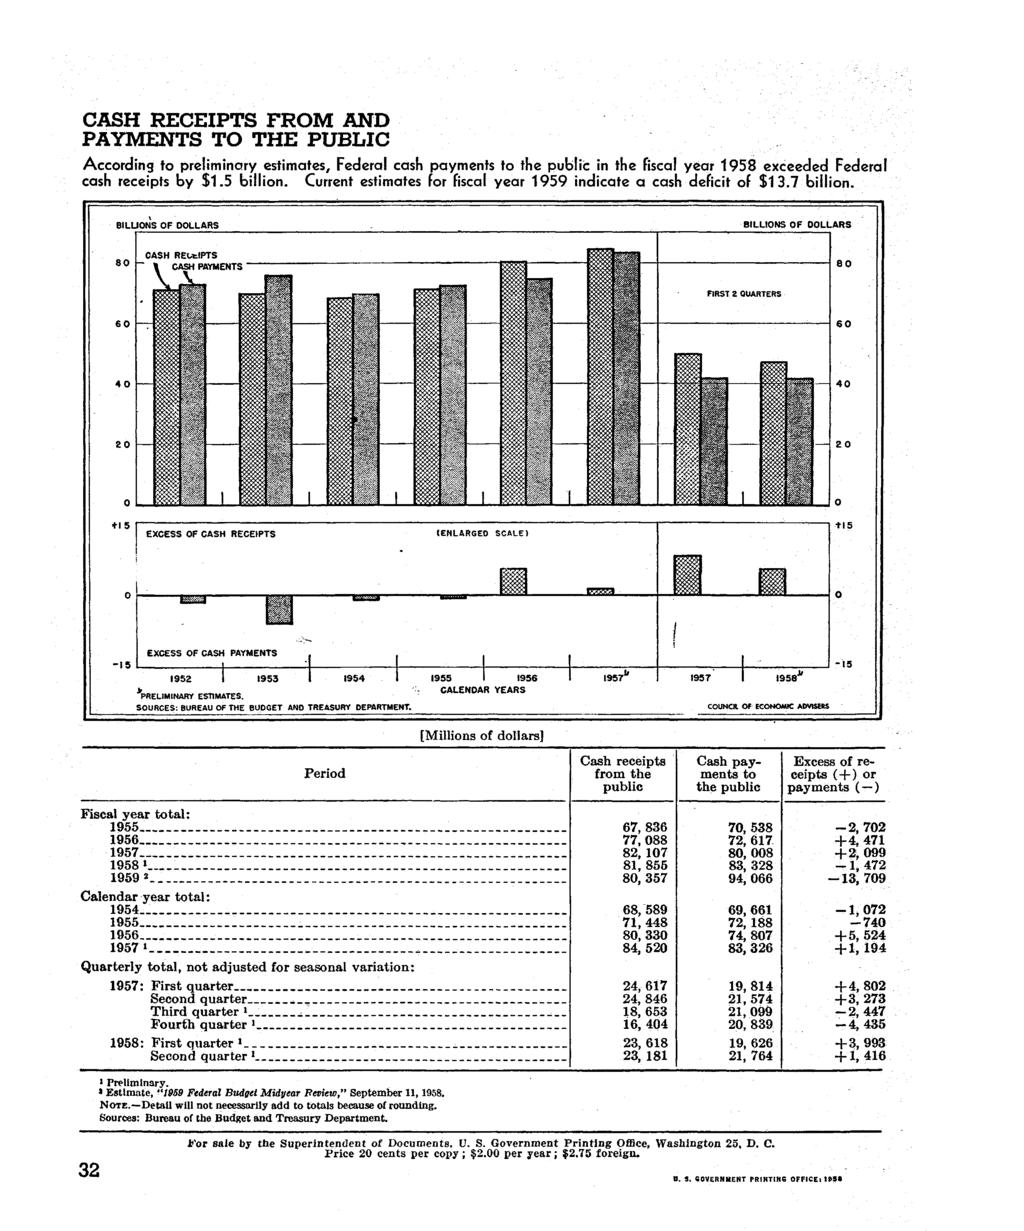 CASH RECEIPTS FROM AND PAYMENTS TO THE PUBLIC According to preliminary estimates, Federal cash payments to the public in the fiscal year 1958 exceeded Federal cash receipts by $1.5 billion.